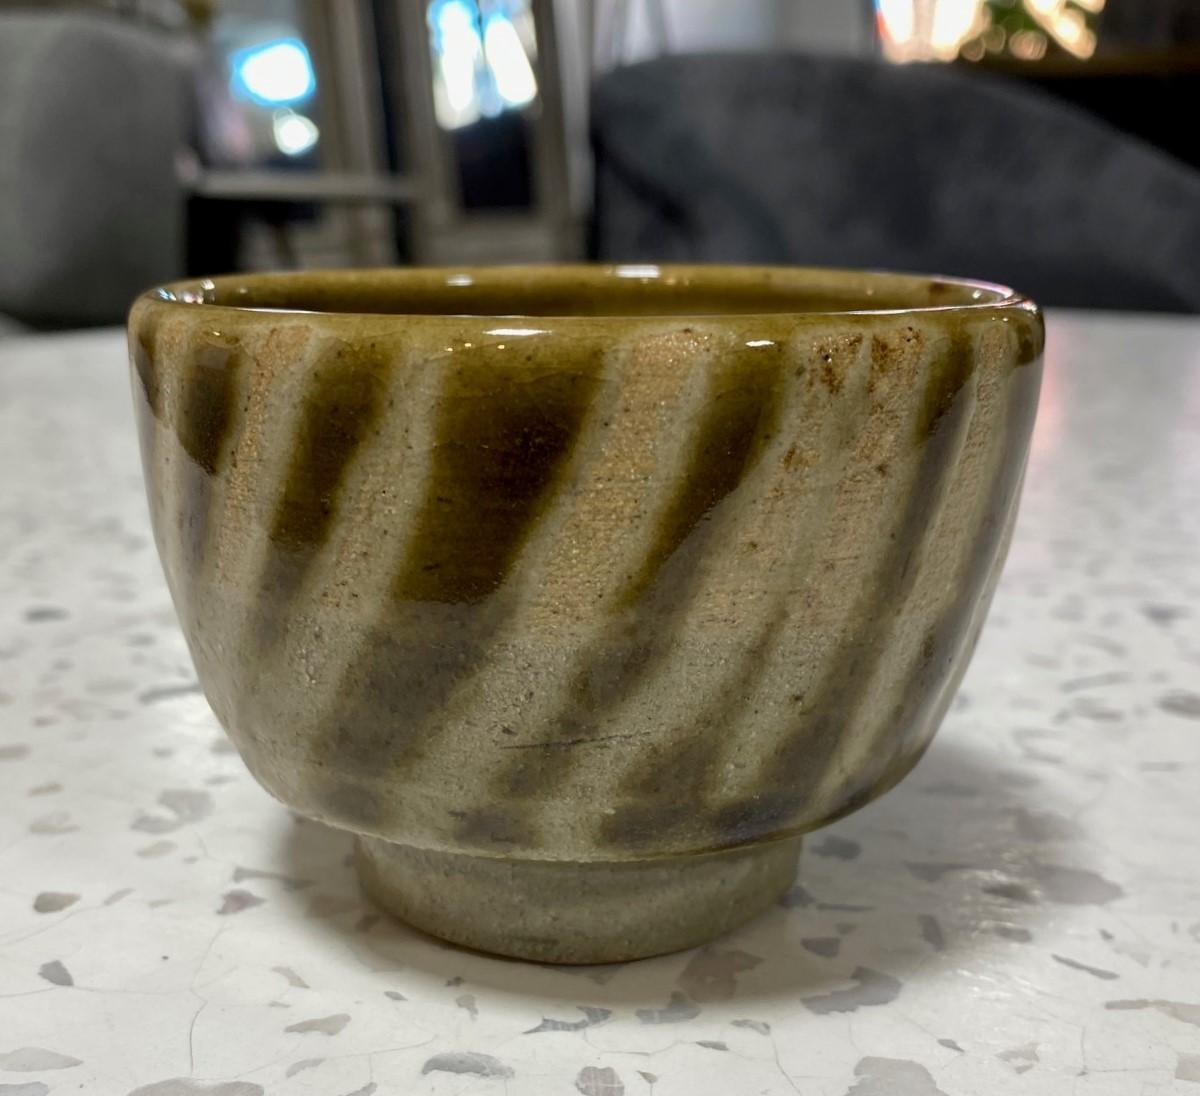 An exquisite, beautifully glazed Yunomi tea cup by master Japanese potter Shoji Hamada featuring Hamada's famous diagonal finger wipe (swipe) technique and a glossy dark celadon Oribe rice ash glaze which is accentuated by the underlying iron-laden